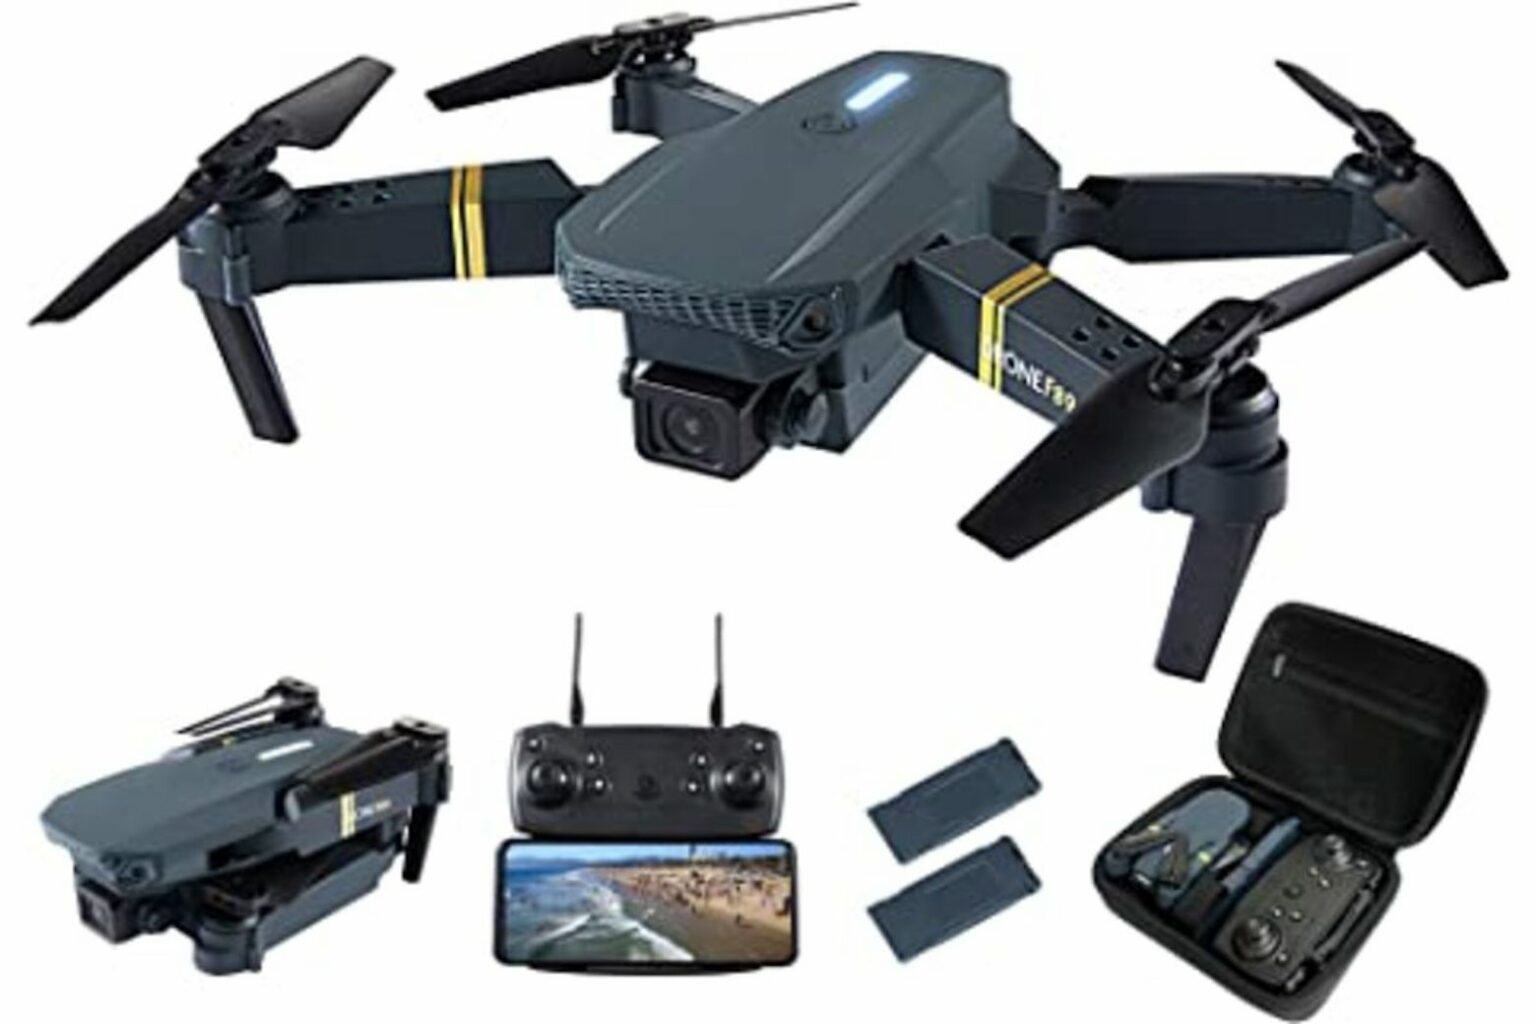 Launch your drone hobby with this $99.99 foldable quadcopter model.